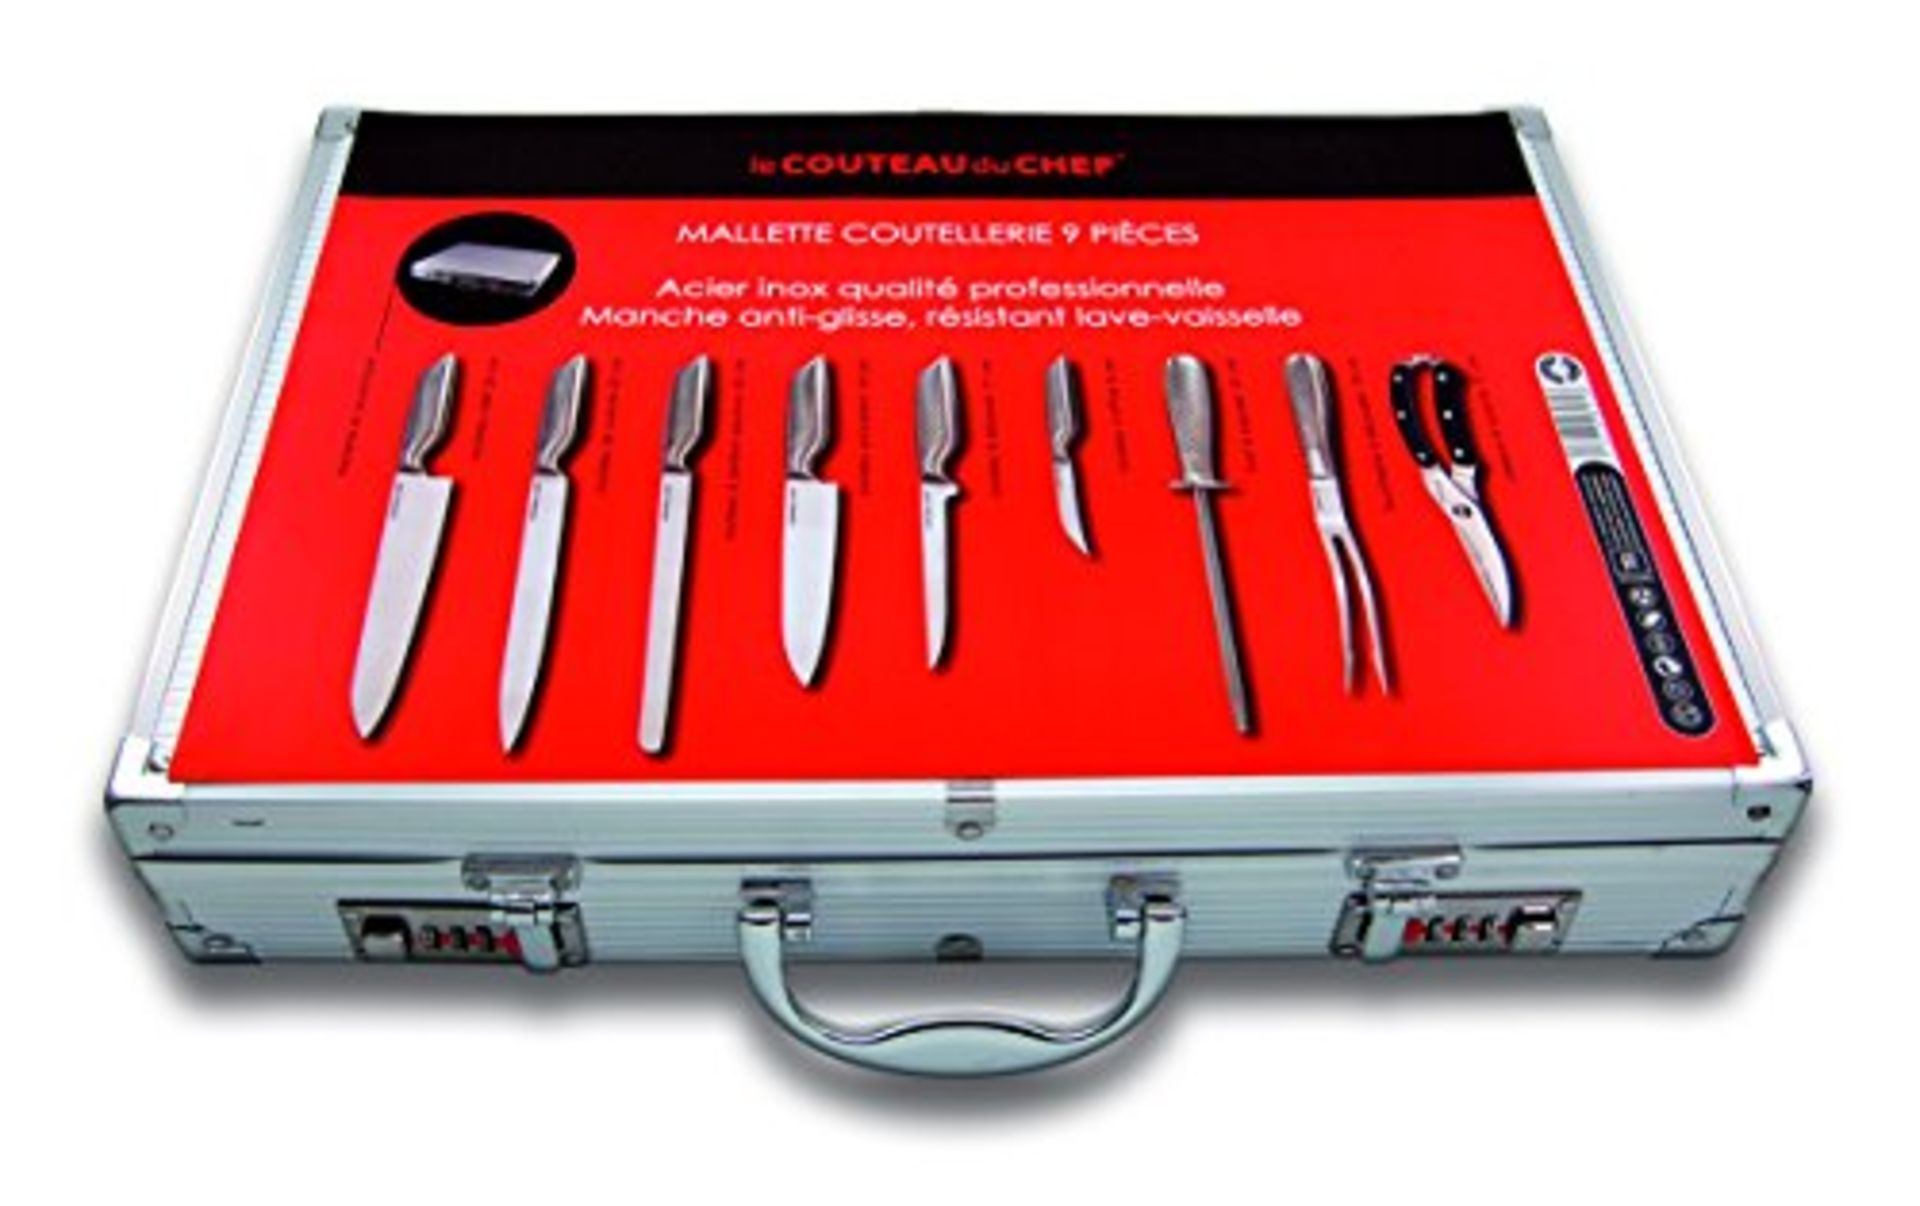 V Brand New Nine Piece Chefs Knife Set In Aluminium Case With Combination Locks Le Couteau Du Chef